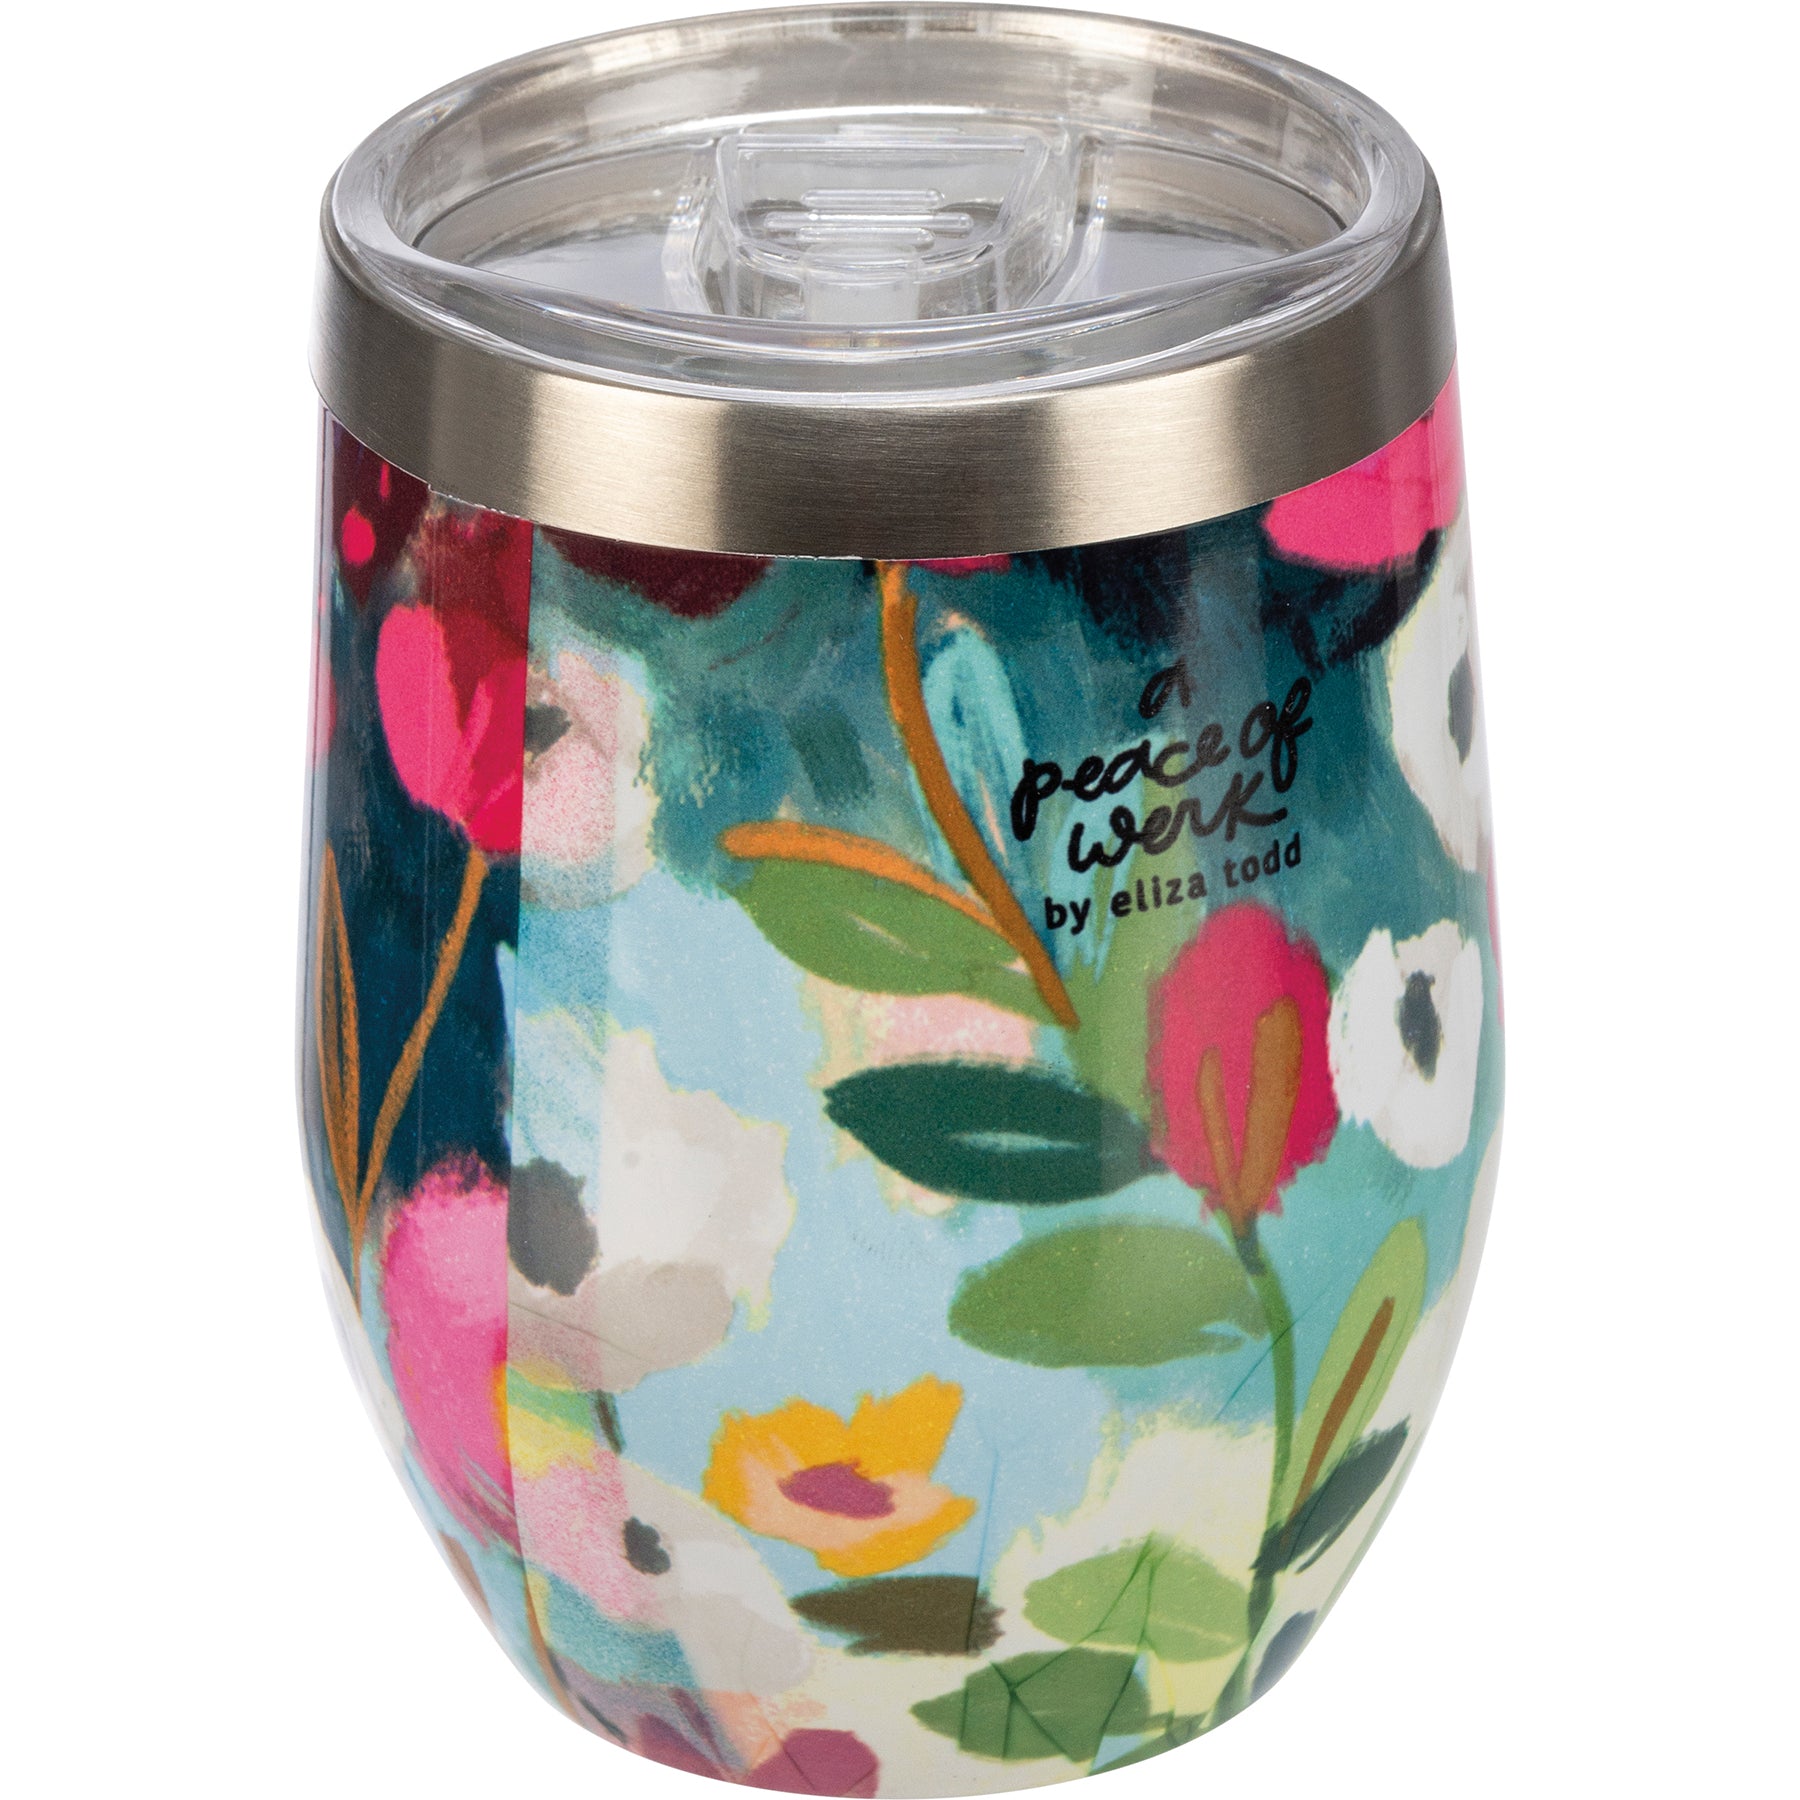 Red Floral Wine Tumbler